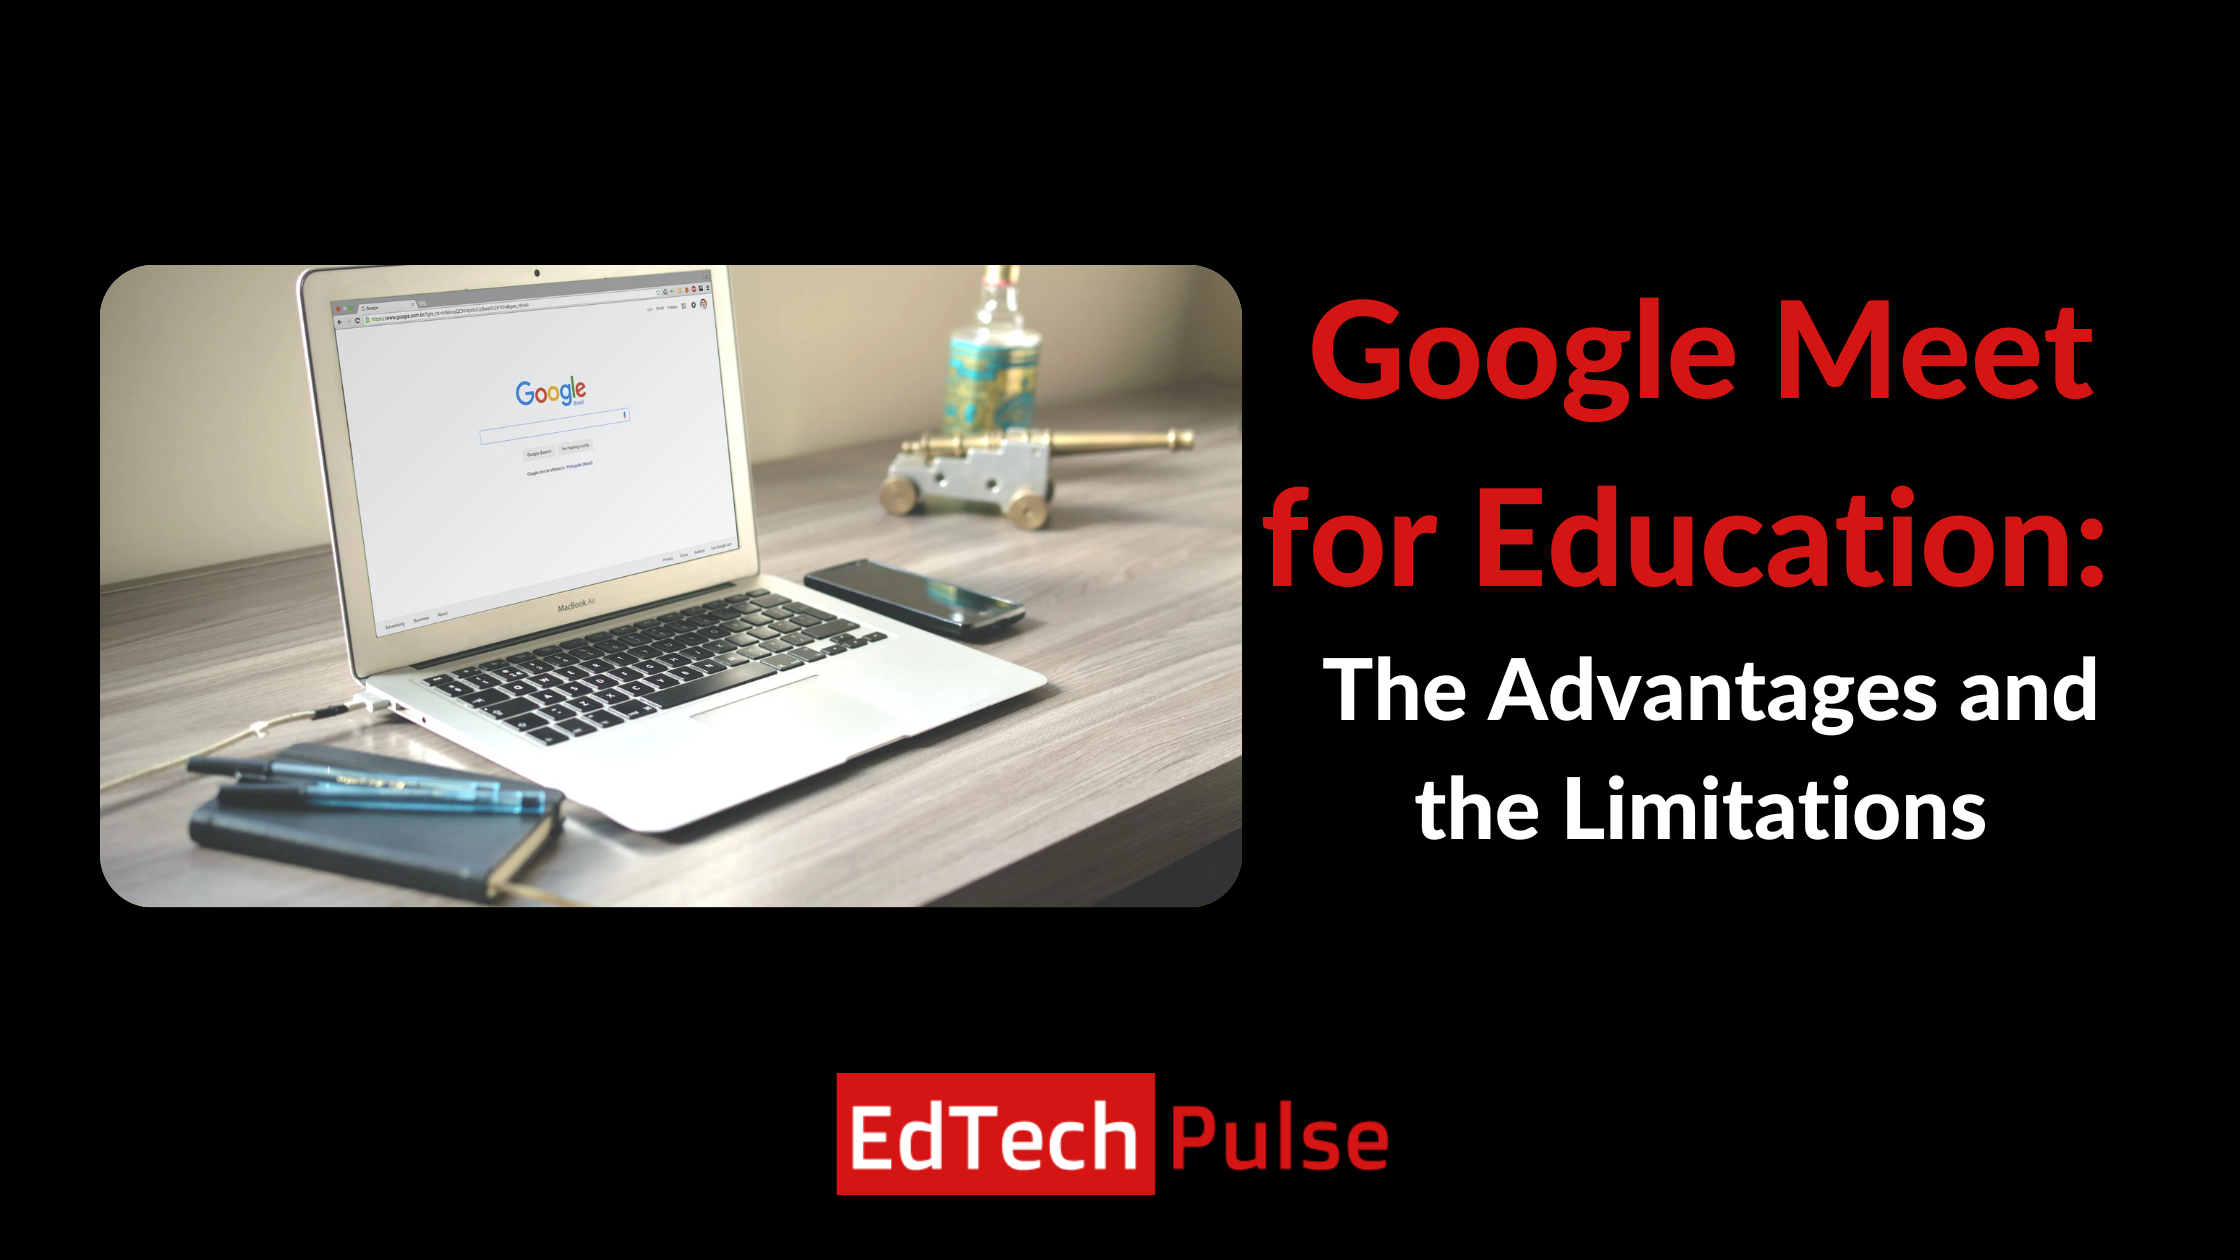 Google Meet for Education: The Advantages and the Limitations